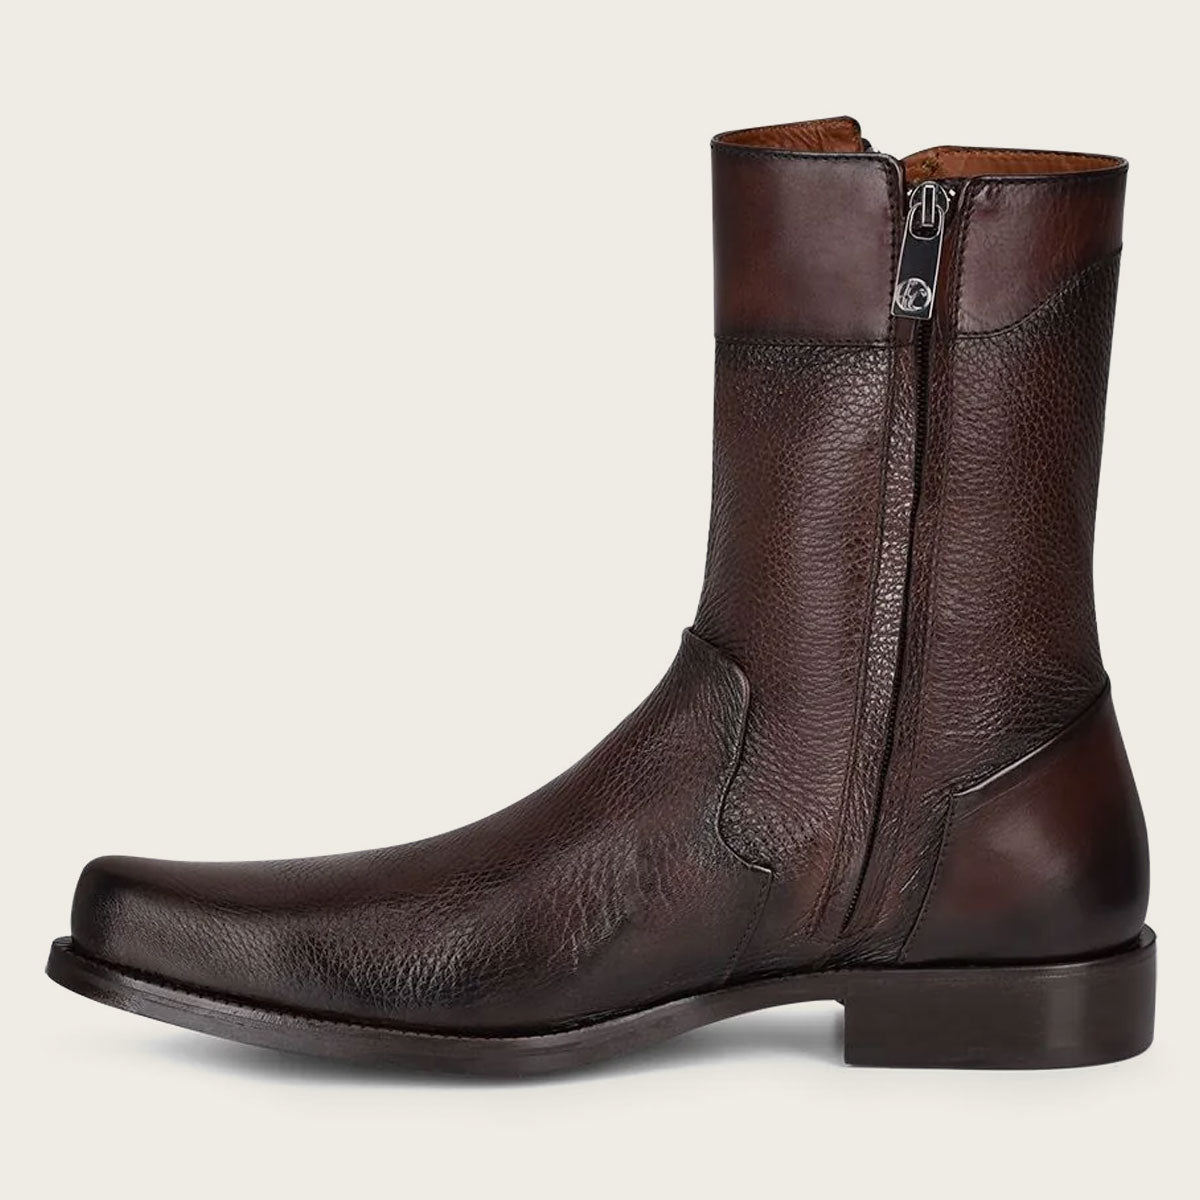 Hand-painted dark brown leather boot - a unique and stylish addition to your footwear collection